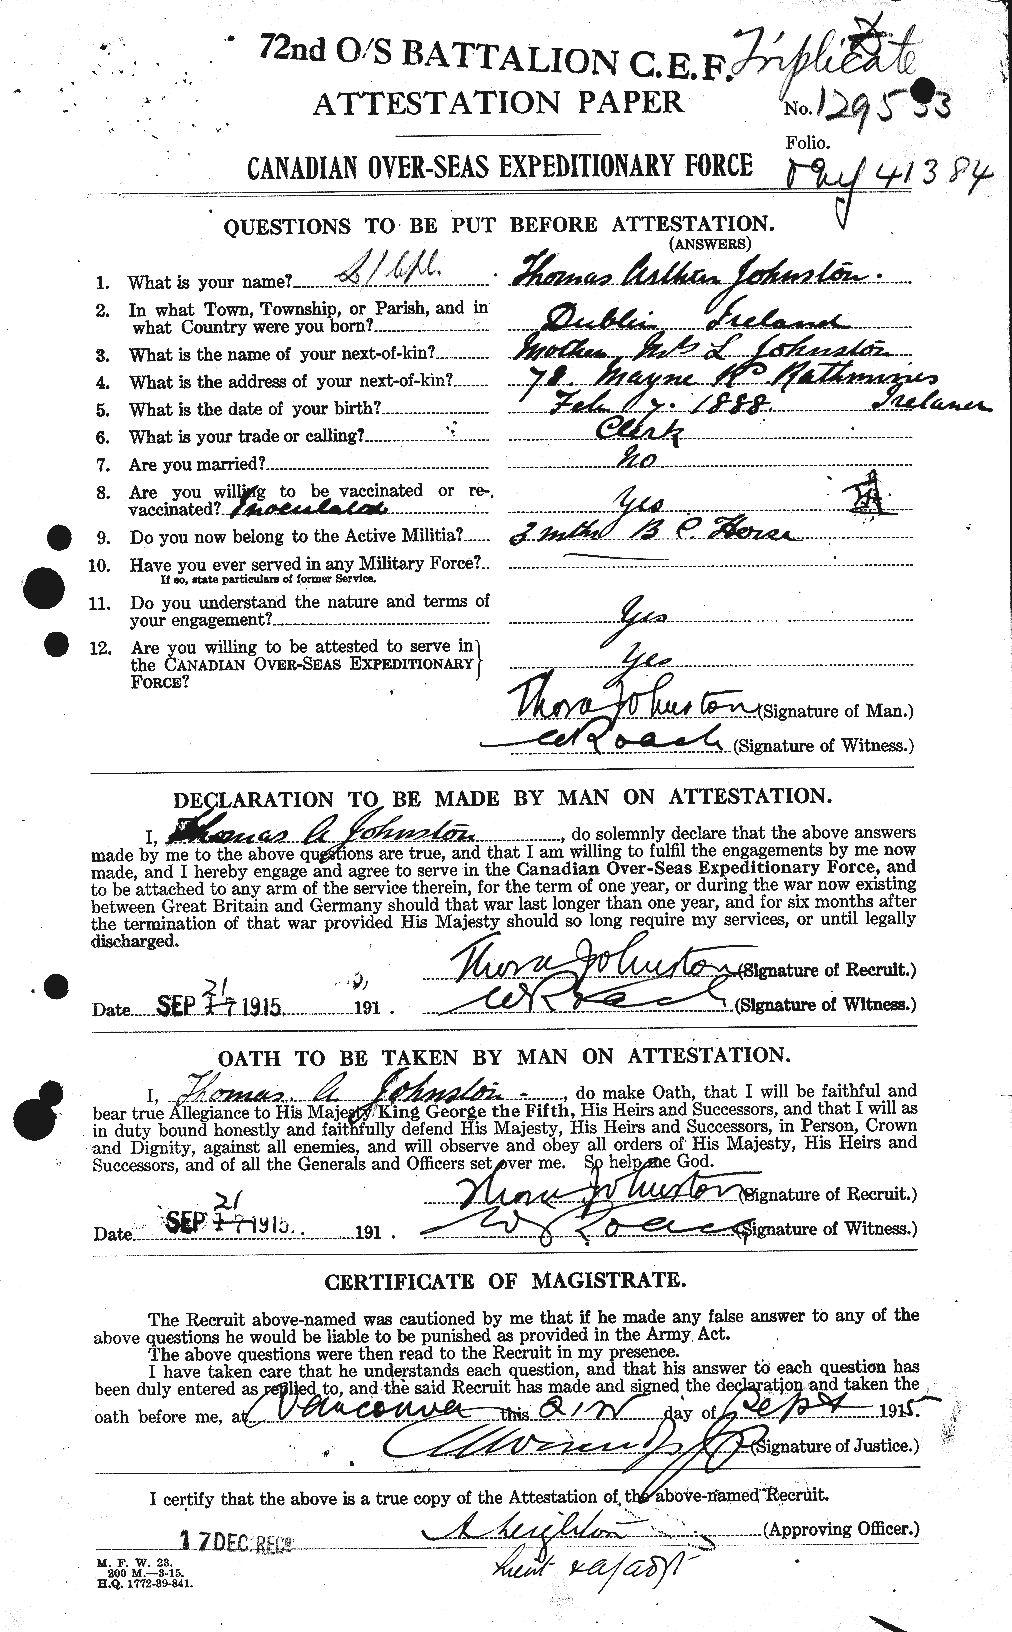 Personnel Records of the First World War - CEF 427155a